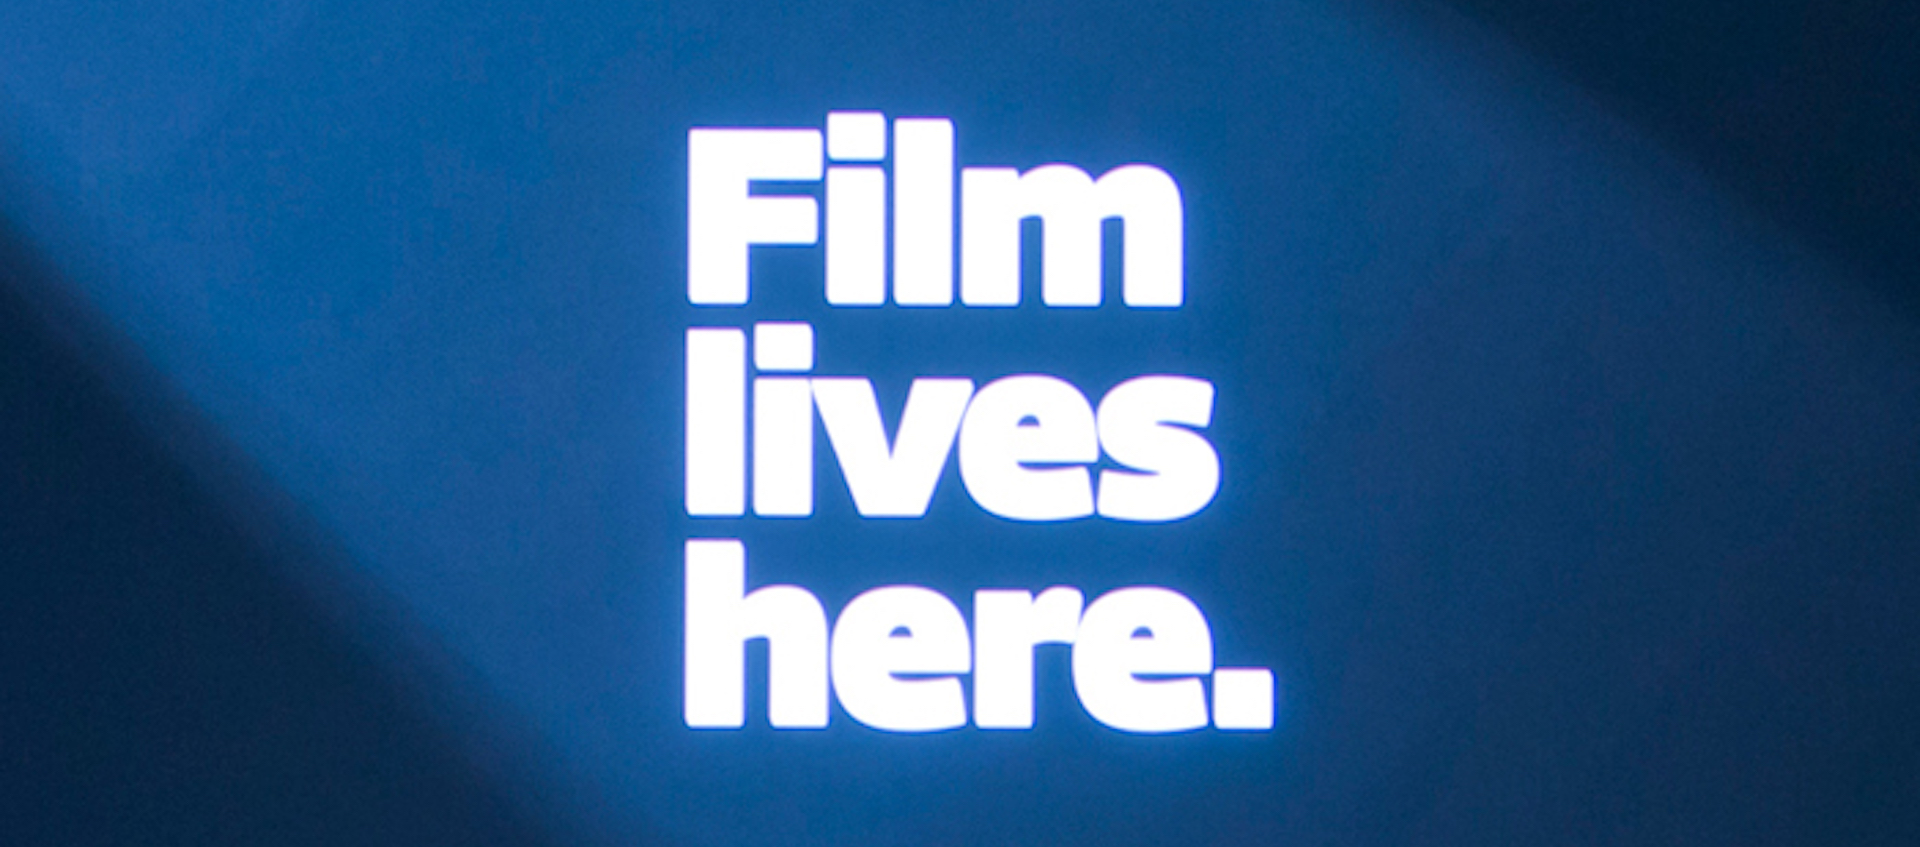 White text on blue background with the Wexner Center Film/Video tagline Film Lives Here